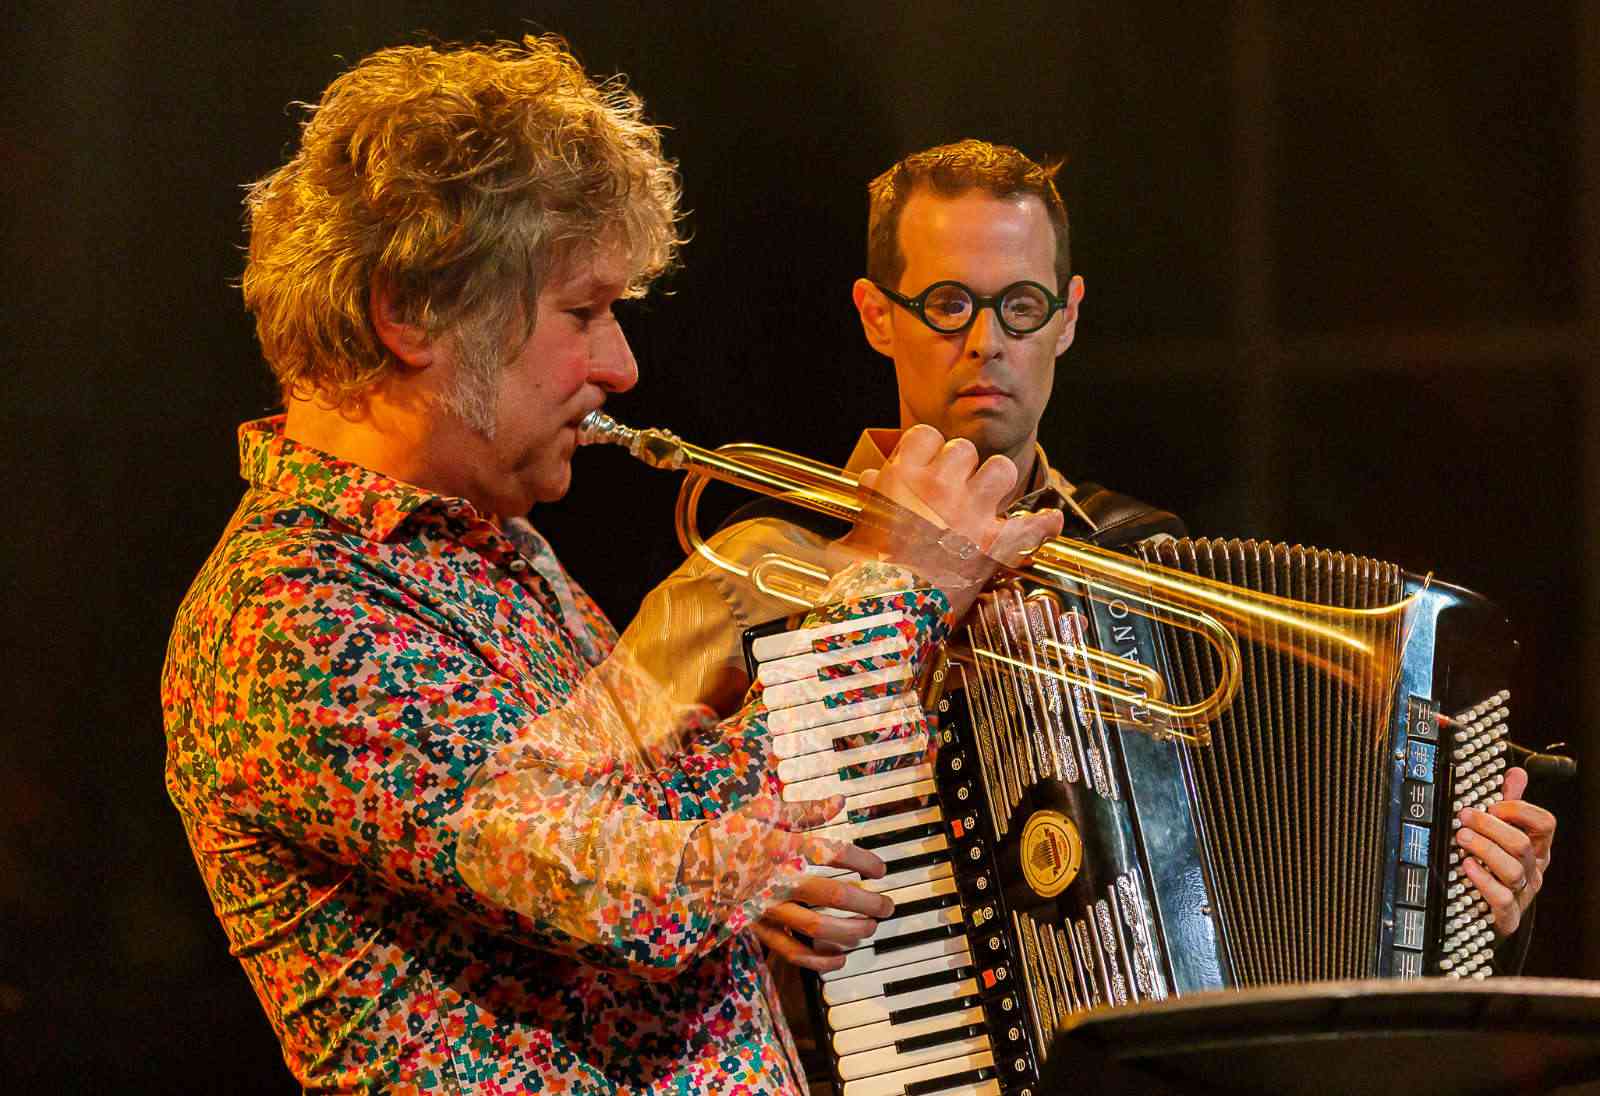 Two For the Road: Vloeimans and Holshouser Trumpet and Accordion is the Drum and Bass for a New Generation says Toon Traveler